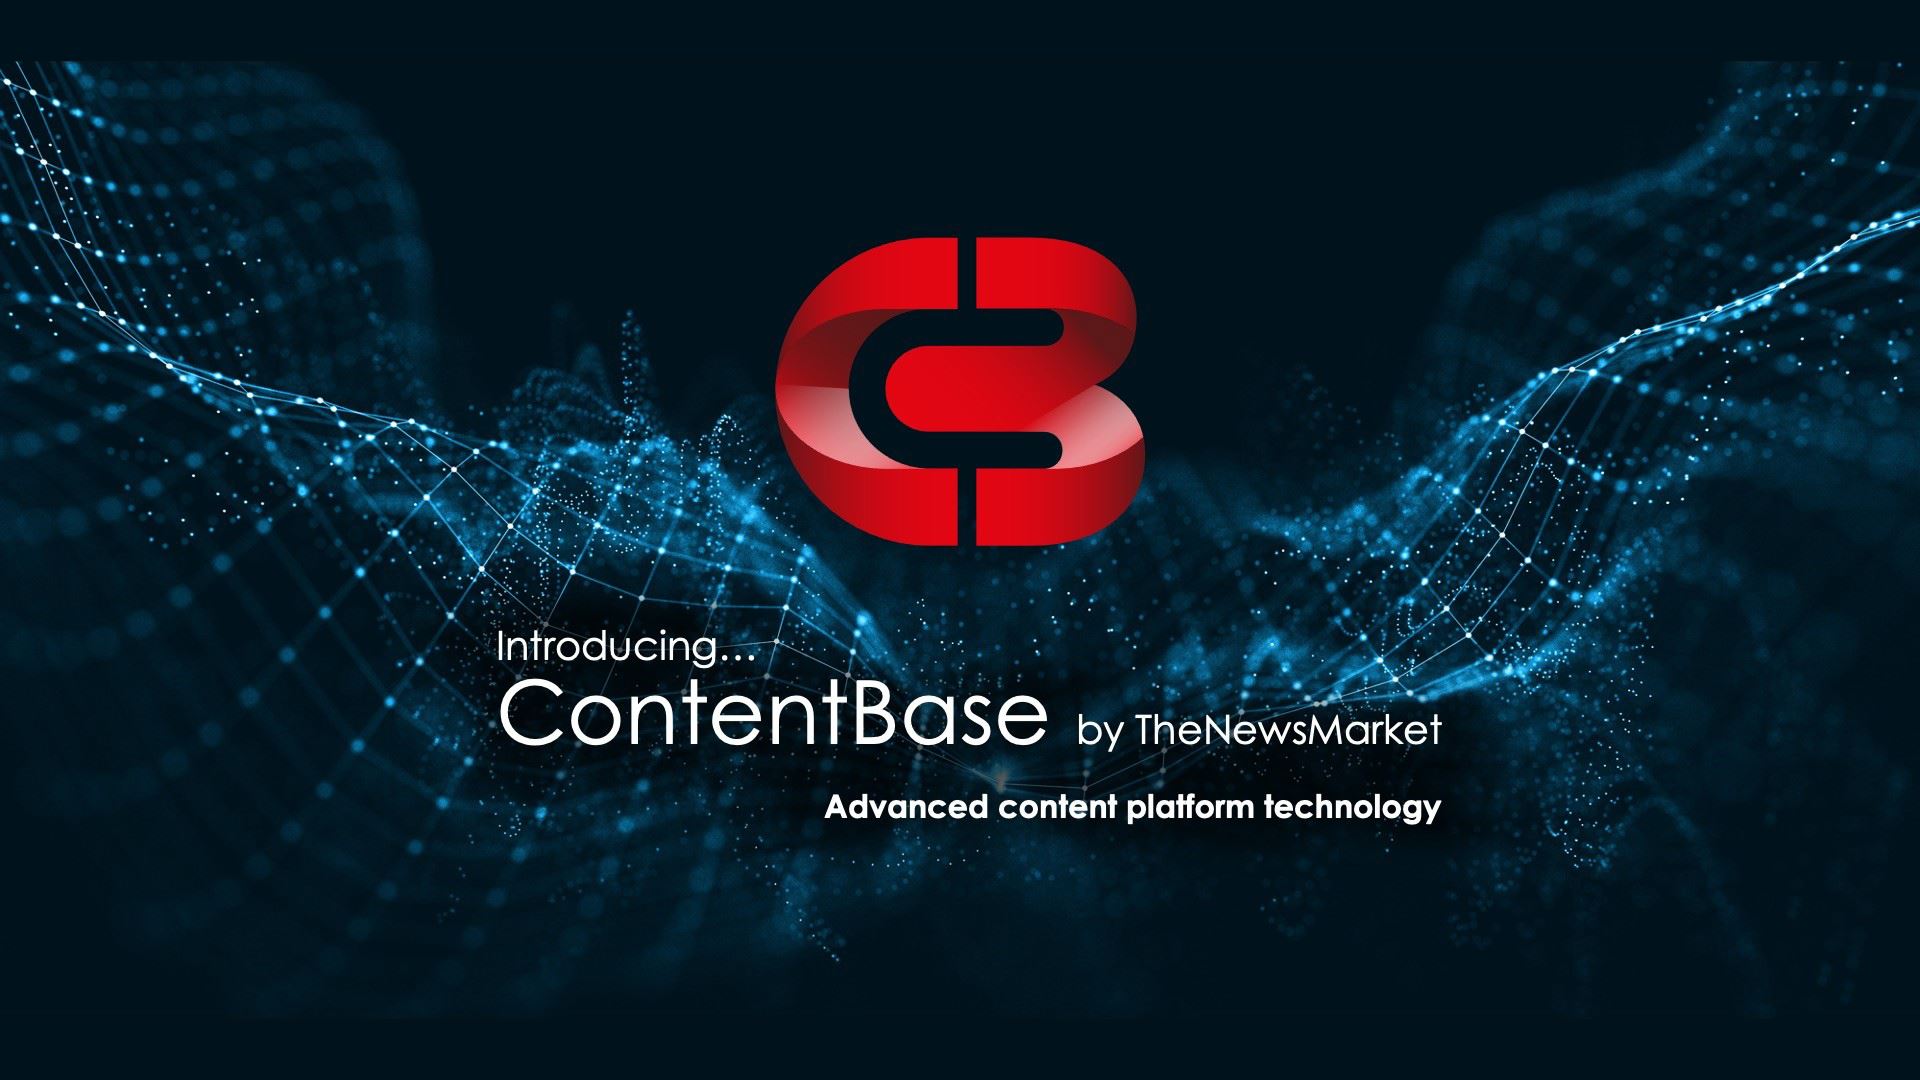 Introducing ContentBase - Advanced Newsroom Technology for Outstanding Brand Communications